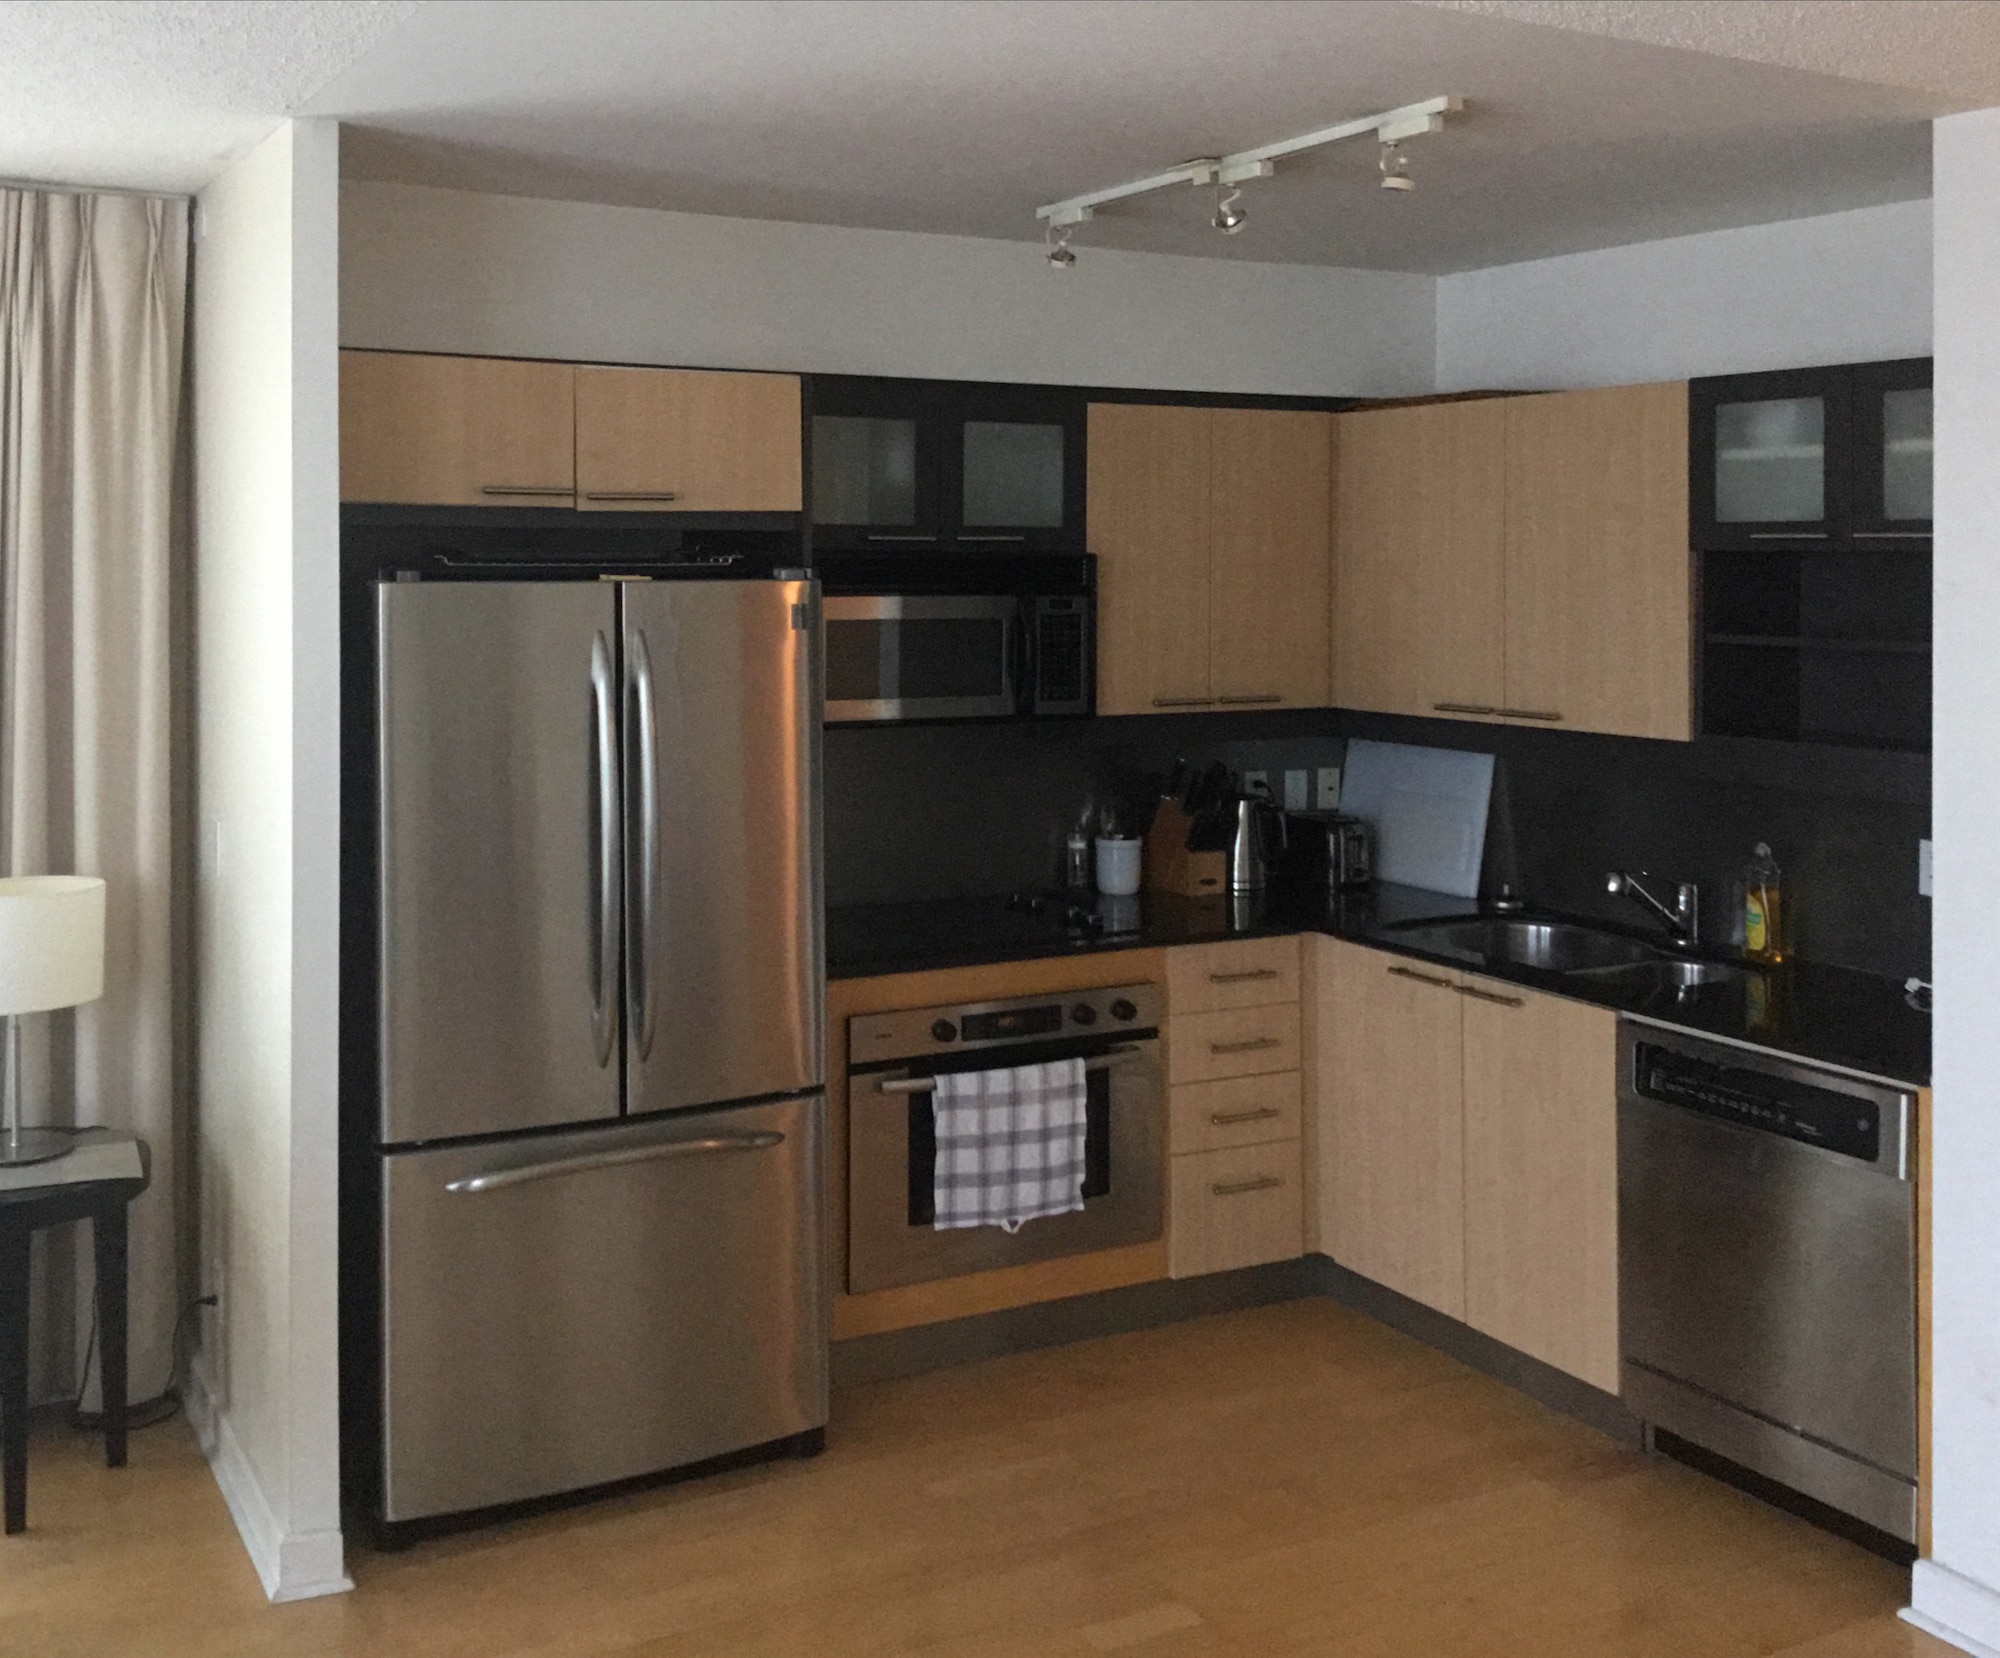 Affordable Luxurious Condo Kitchen Before & After